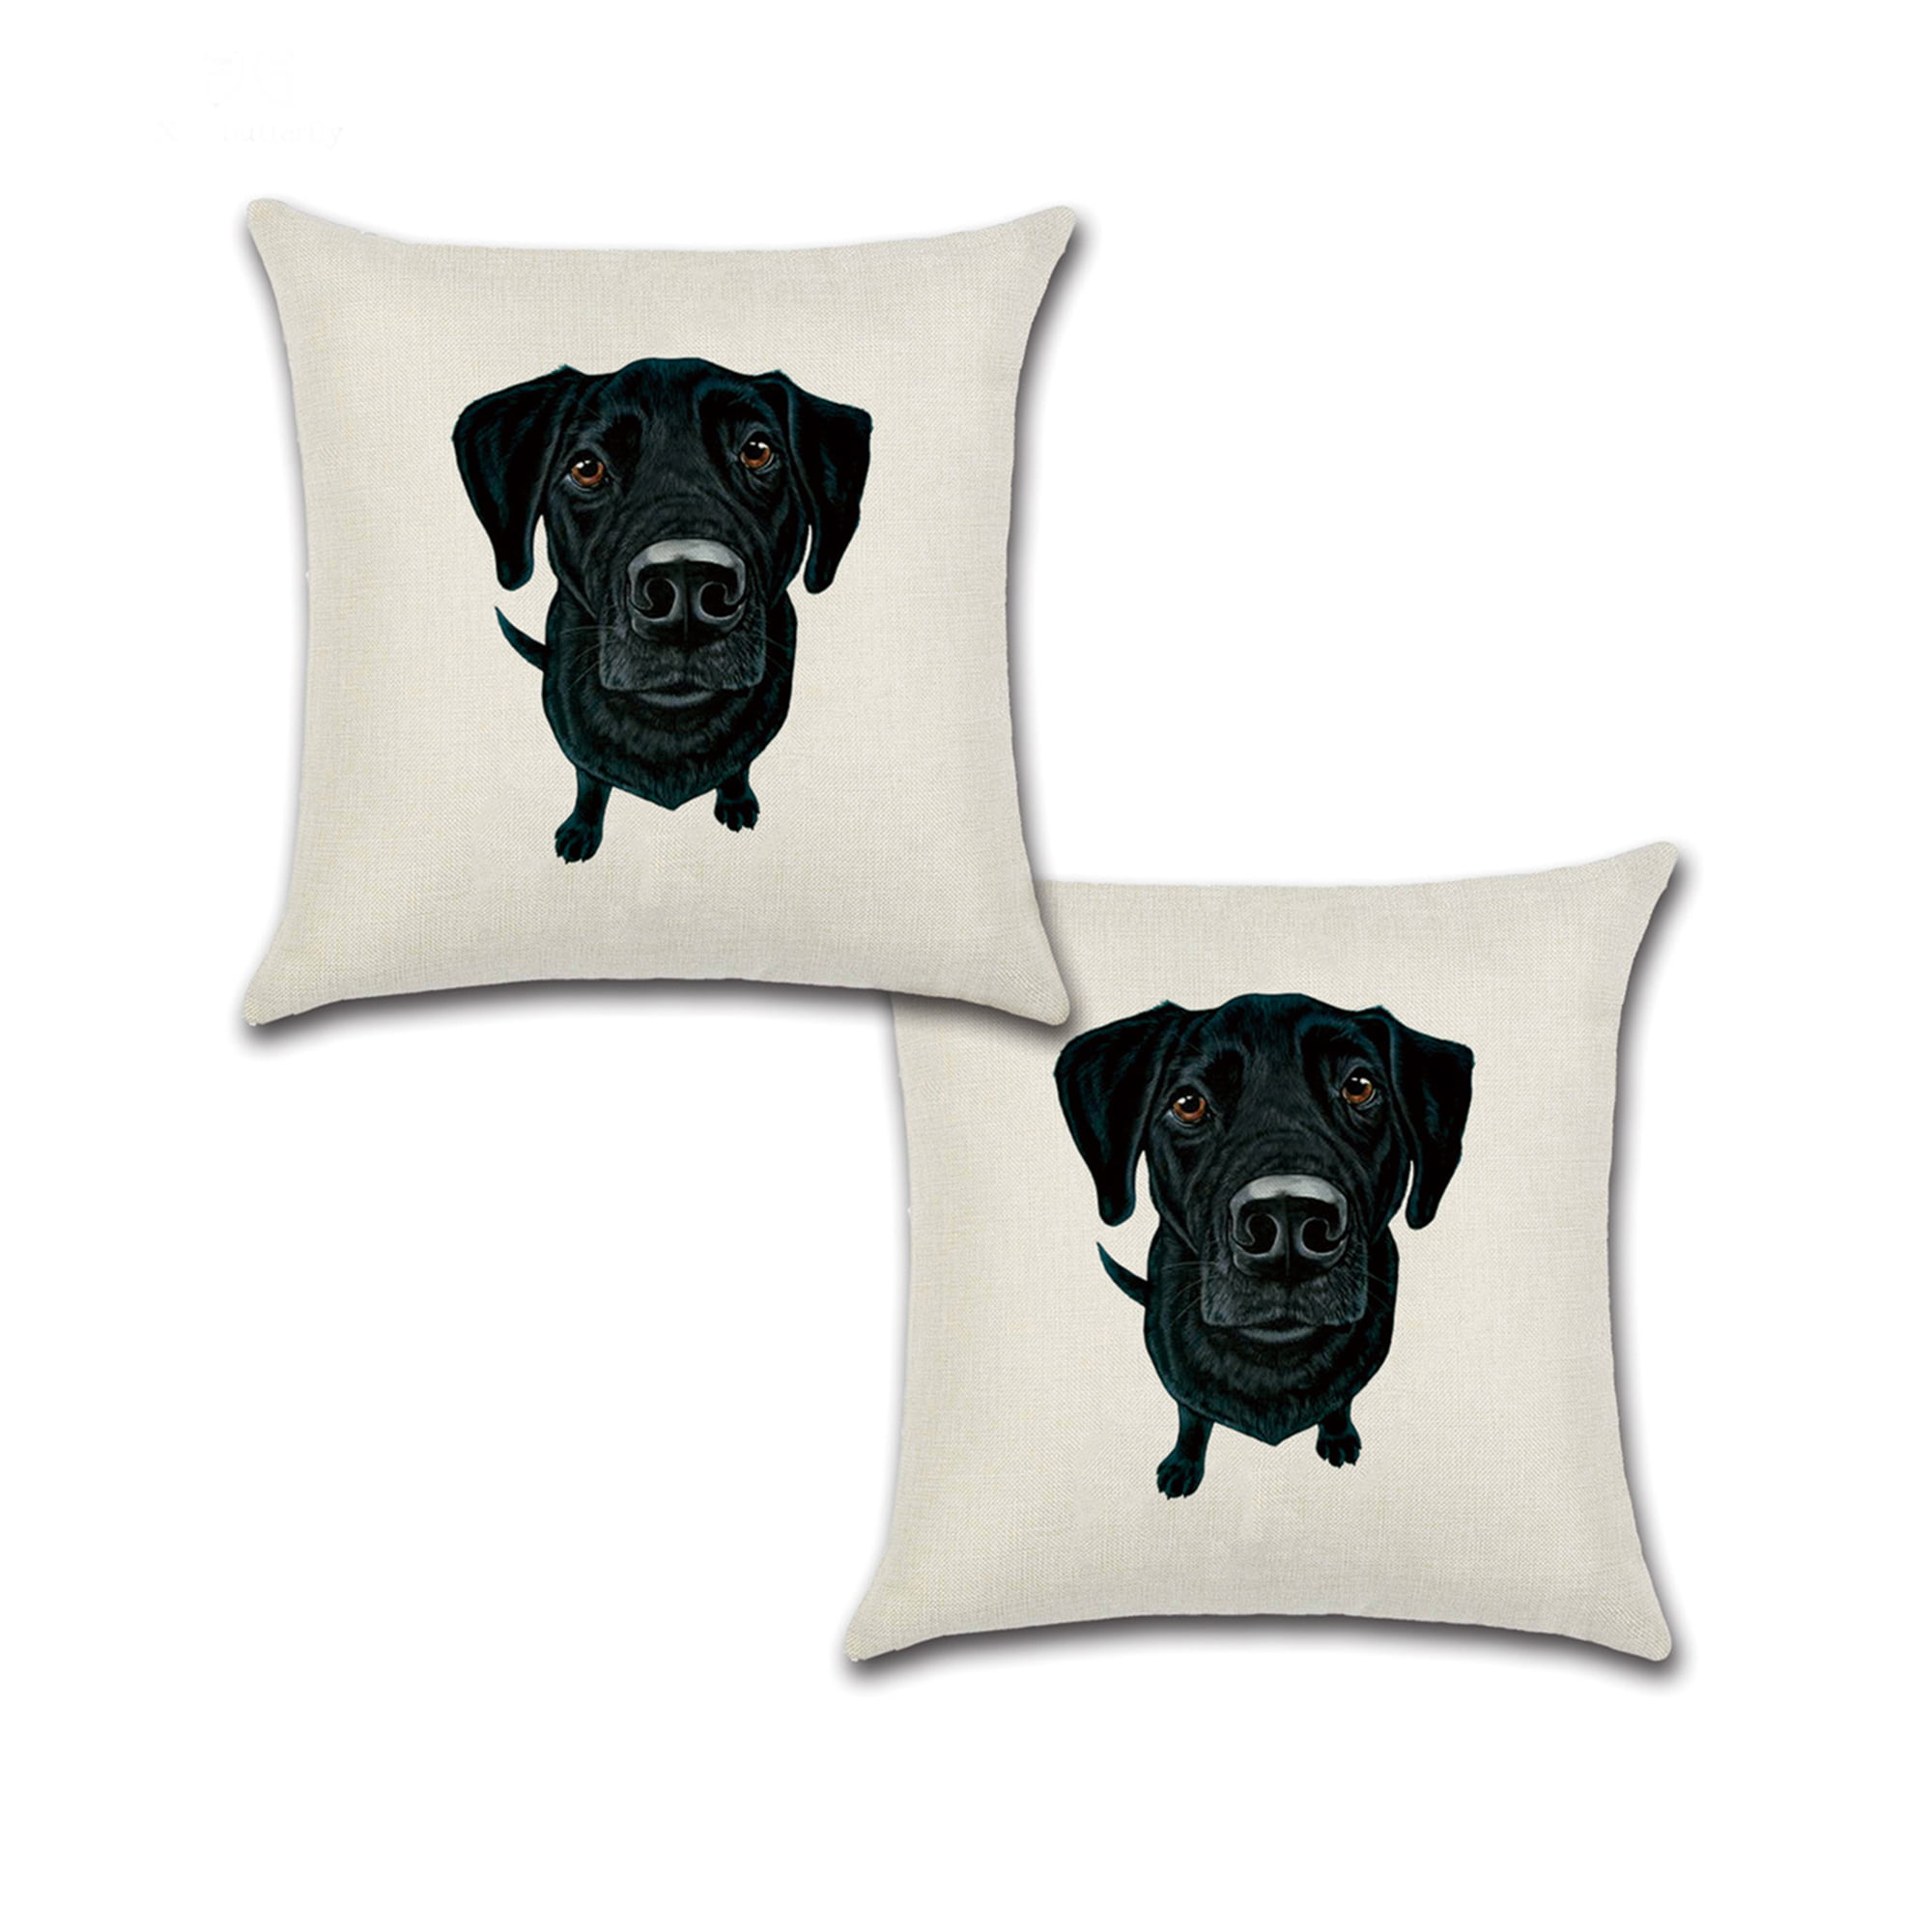 18 x 18 Inch A Good Dog Deserves A Good Bone Pillows Cushion Case for Sofa Couch Set of 4 AVOIN colorlife Dag Home Paw Pet Throw Pillow Covers 